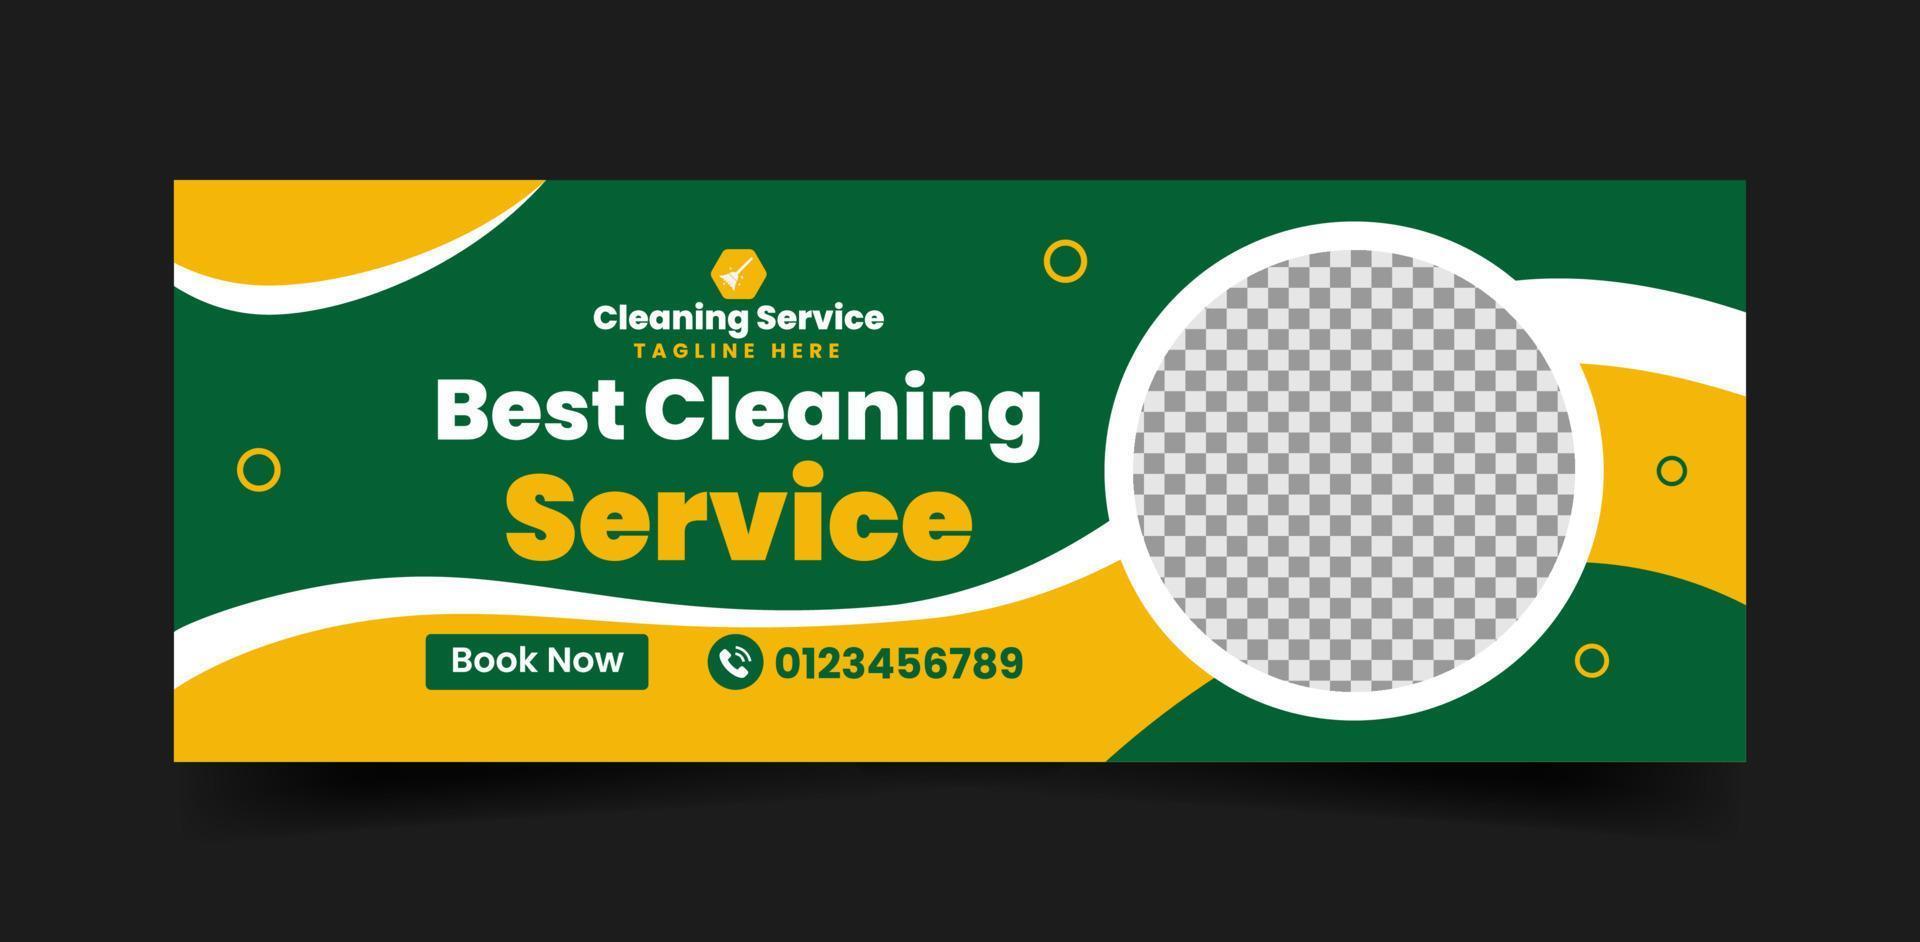 Best Cleaning Service Social Media Cover Photo and Web Banner Ads Template Design vector